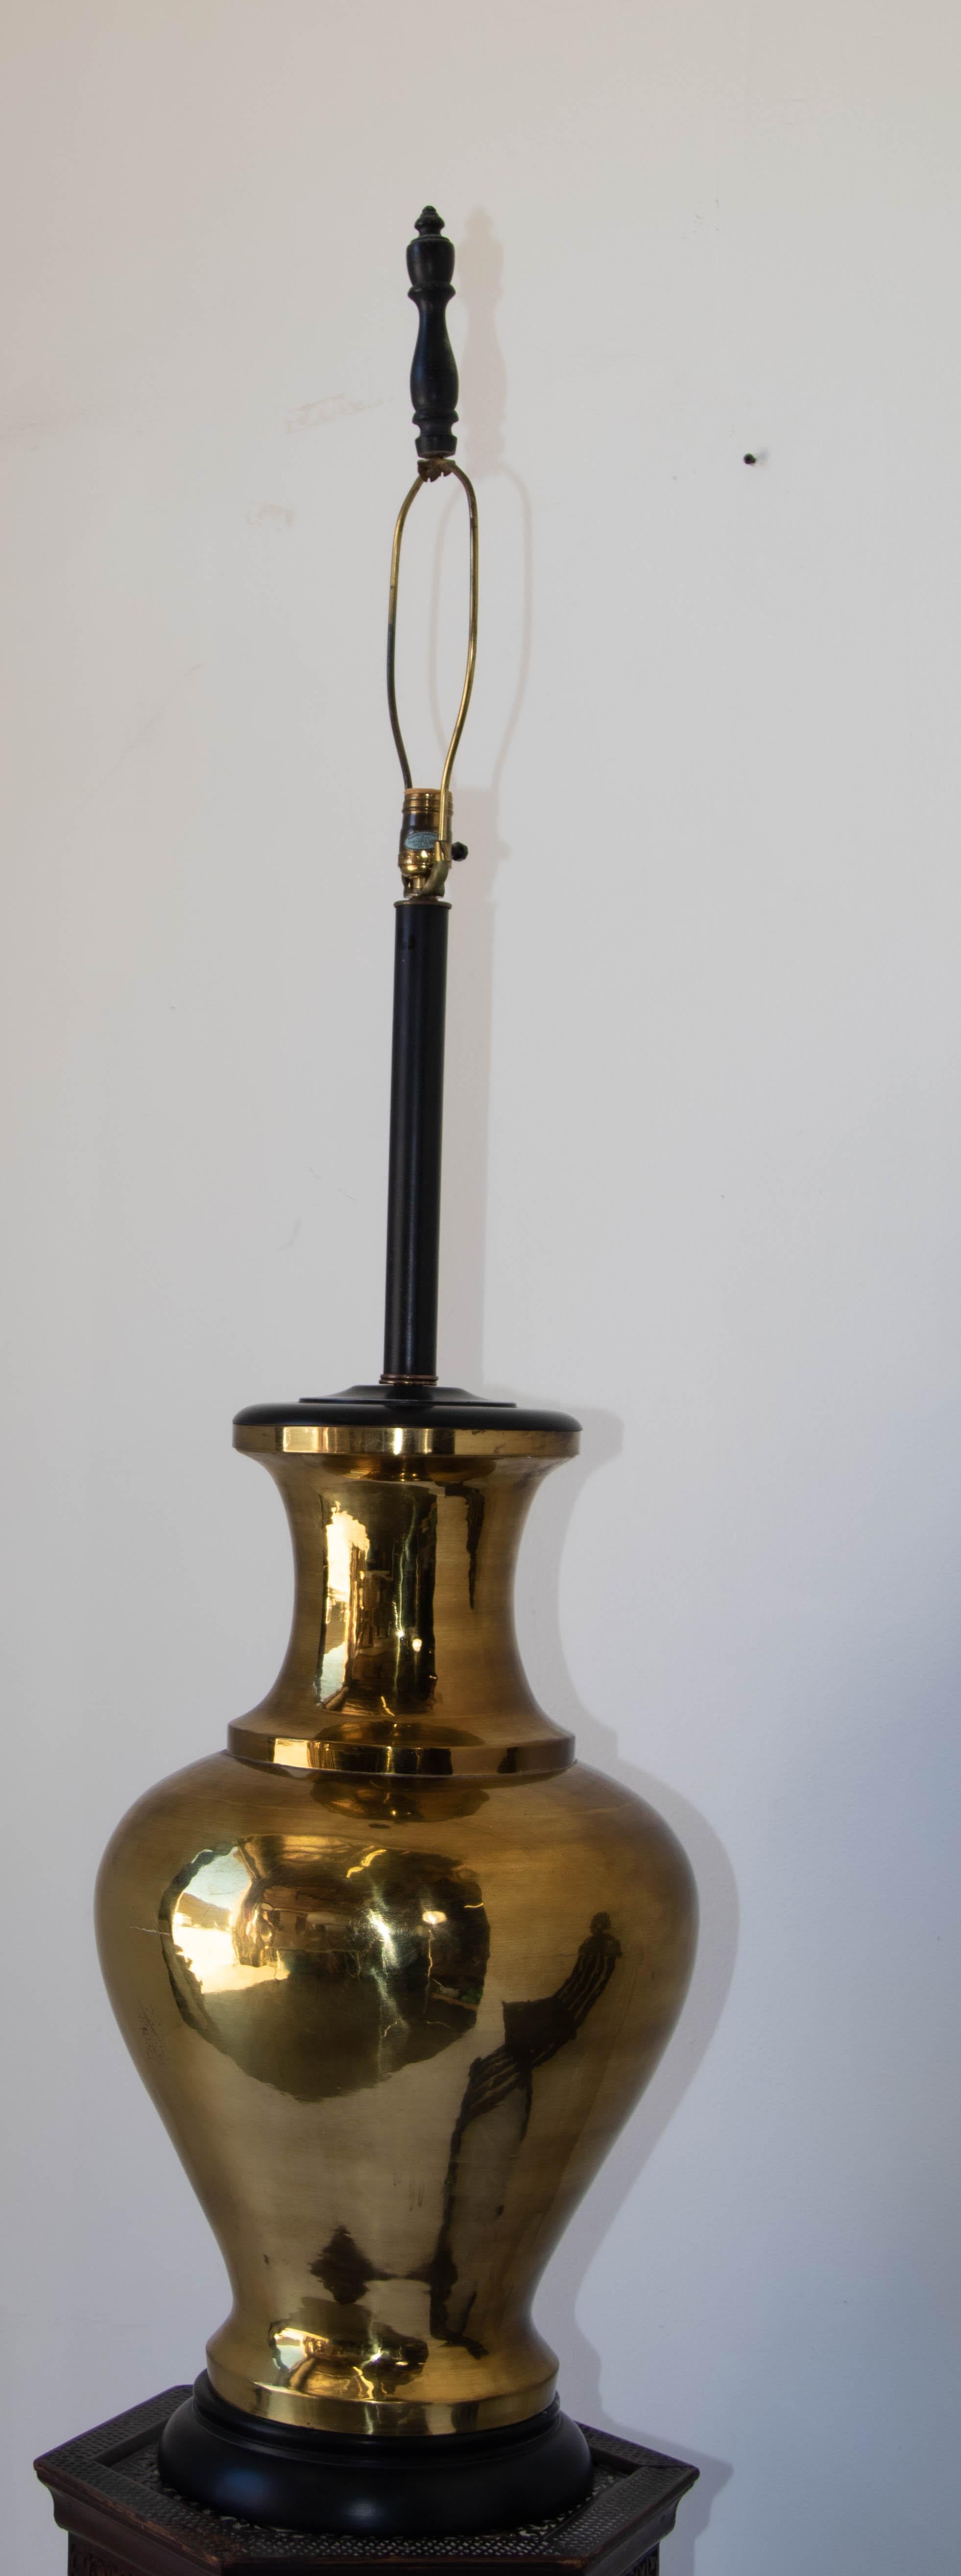 Mid-Century Modern Polished Brass Large Scale Chinoiserie Urn Table Lamp, 1950 For Sale 4